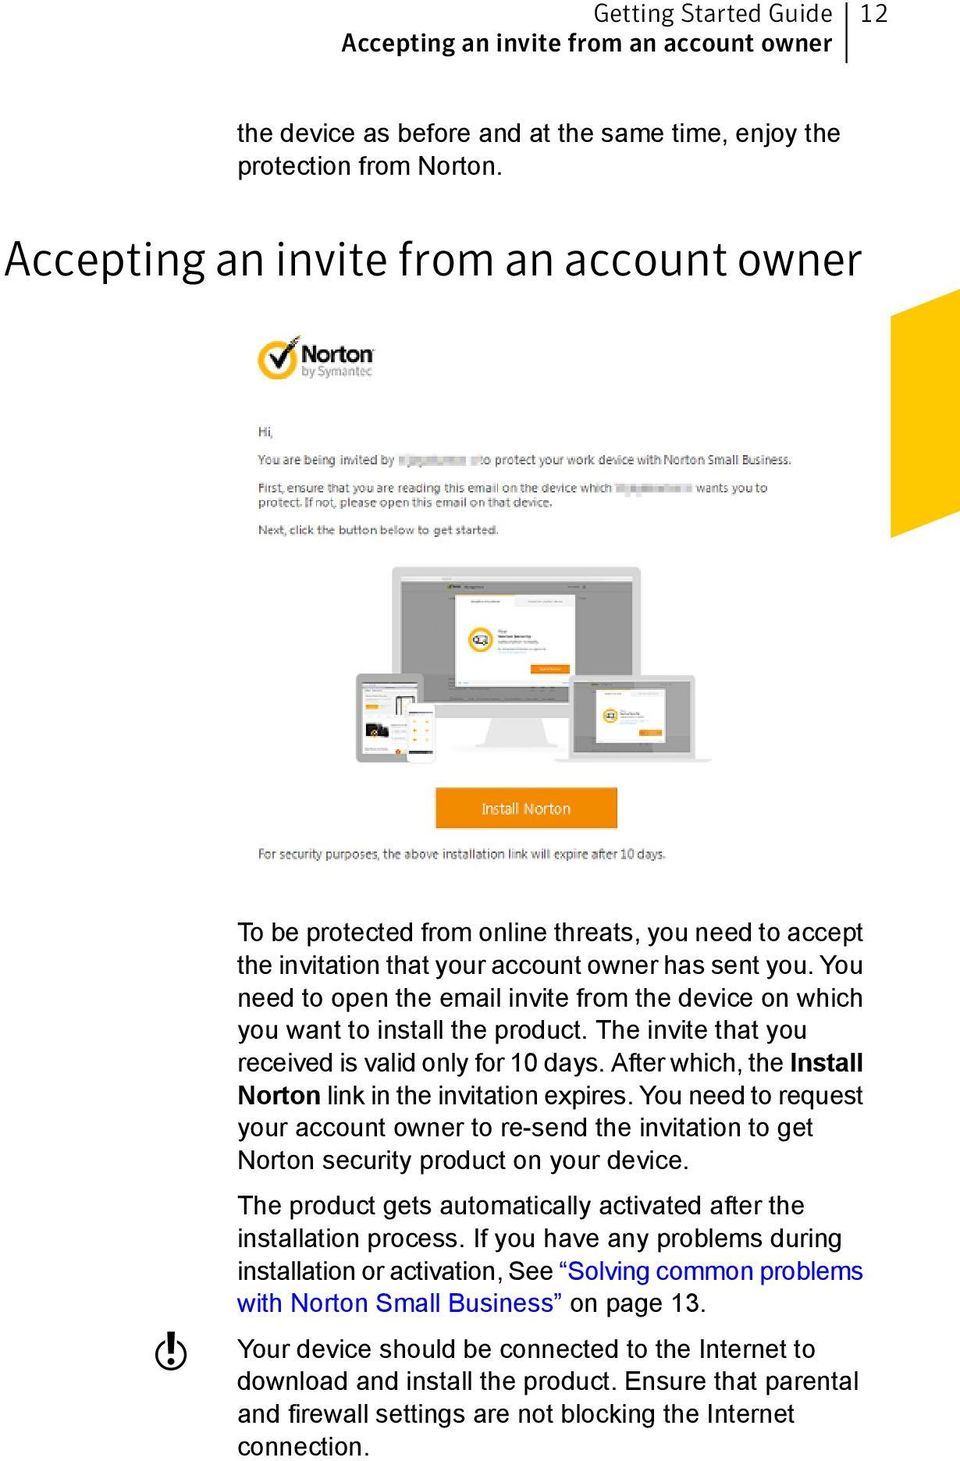 You need to open the email invite from the device on which you want to install the product. The invite that you received is valid only for 10 days.